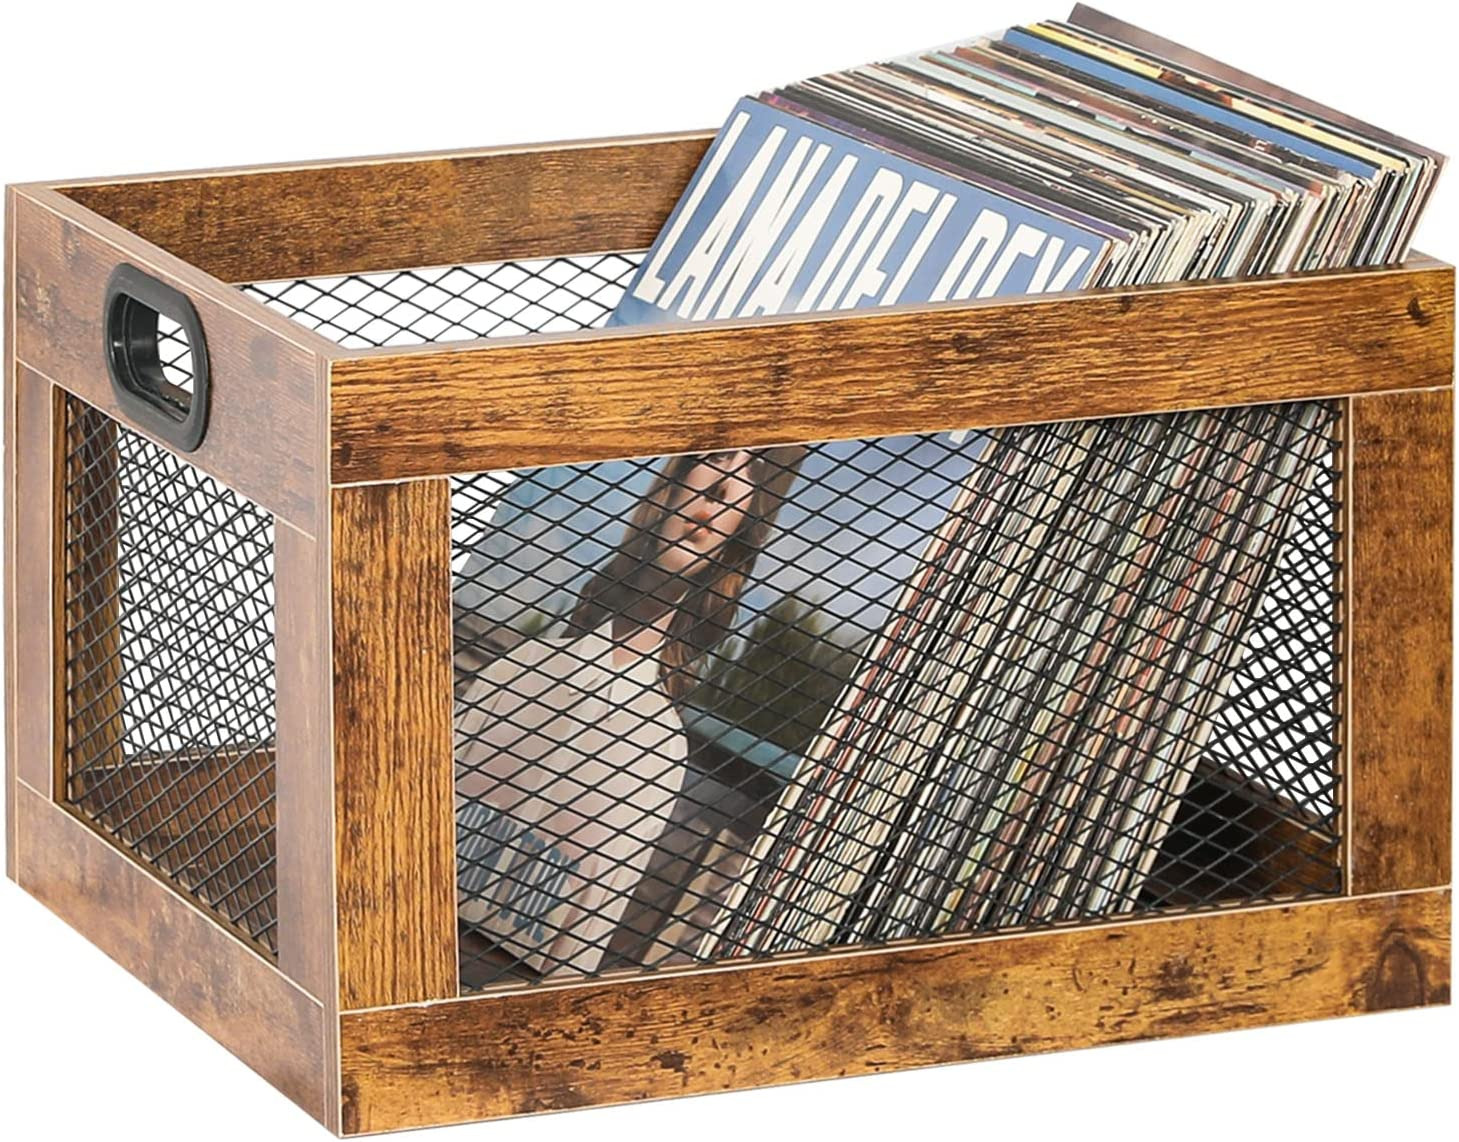 Wooden Vinyl Record Storage Crate, Classic Cube Organizer for 100+ Records, Brow